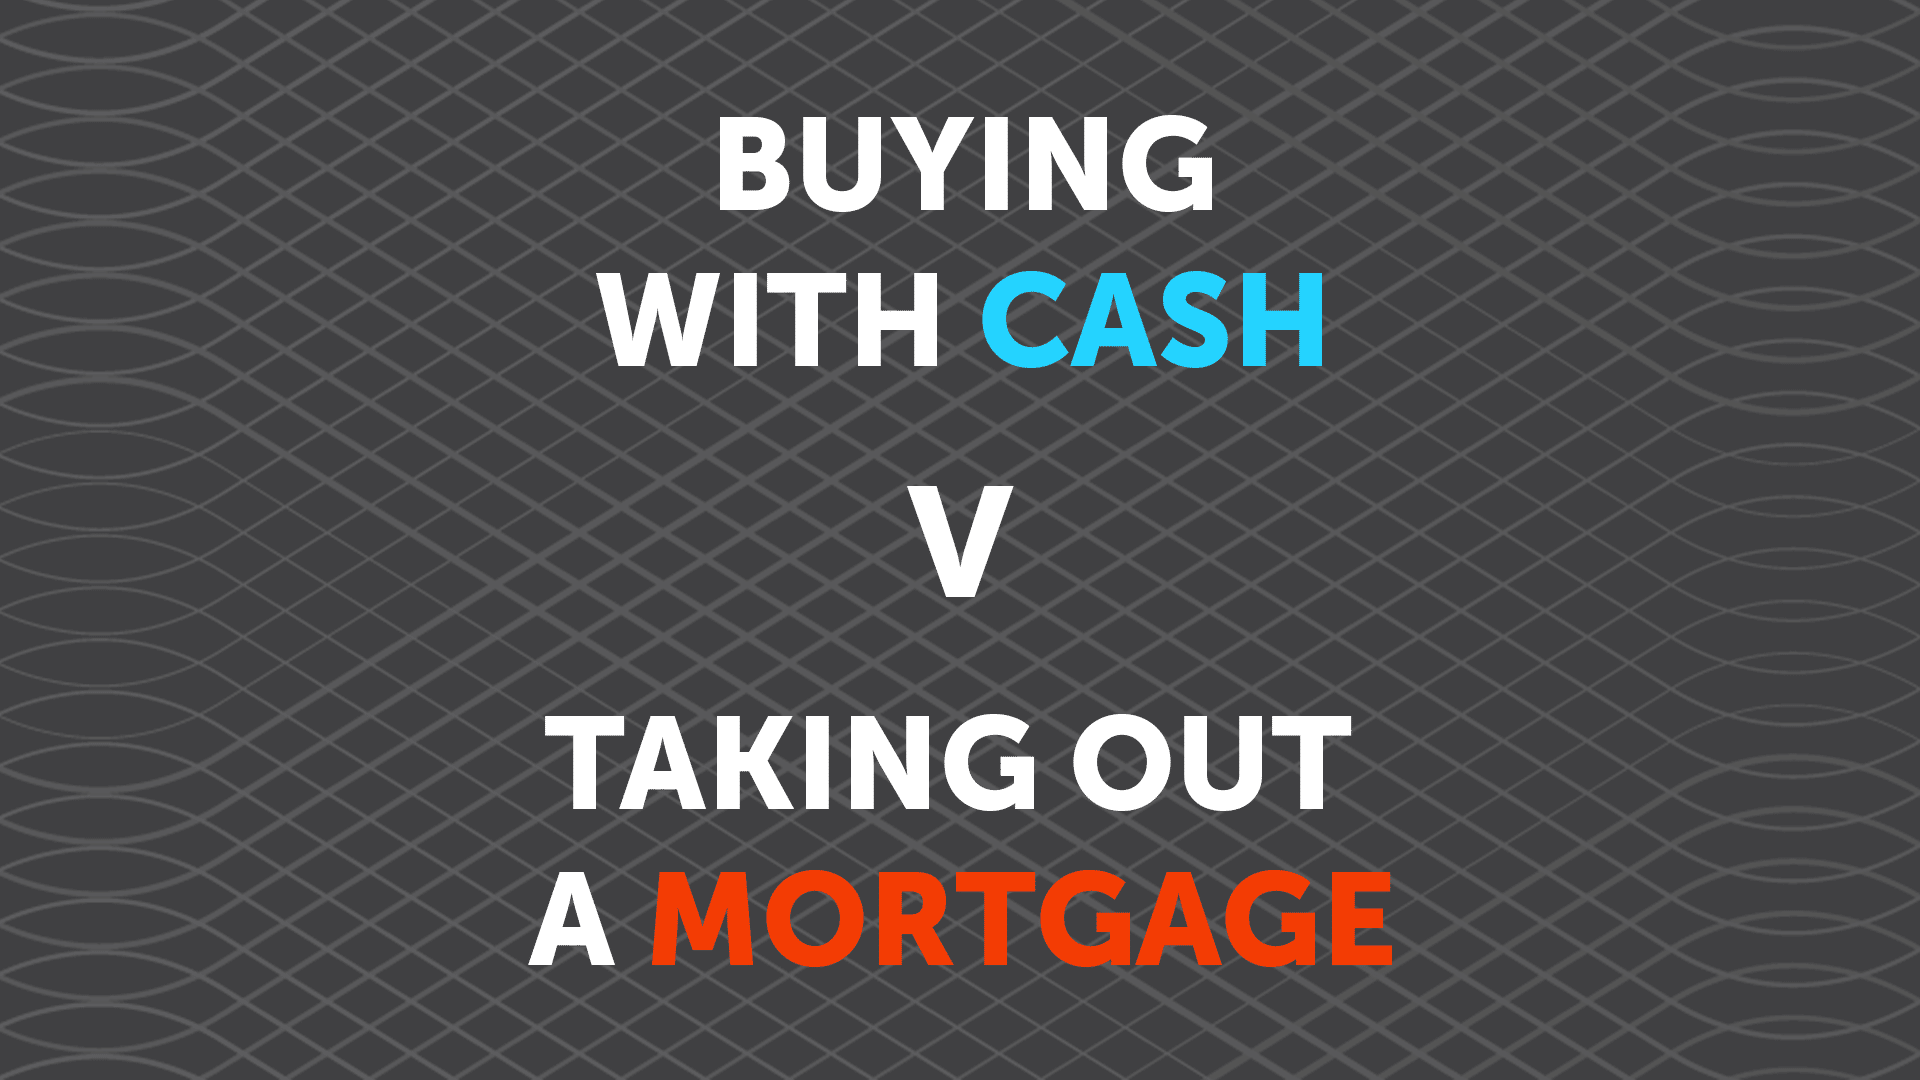 Should I buy a Property Outright or Take out a Mortgage?